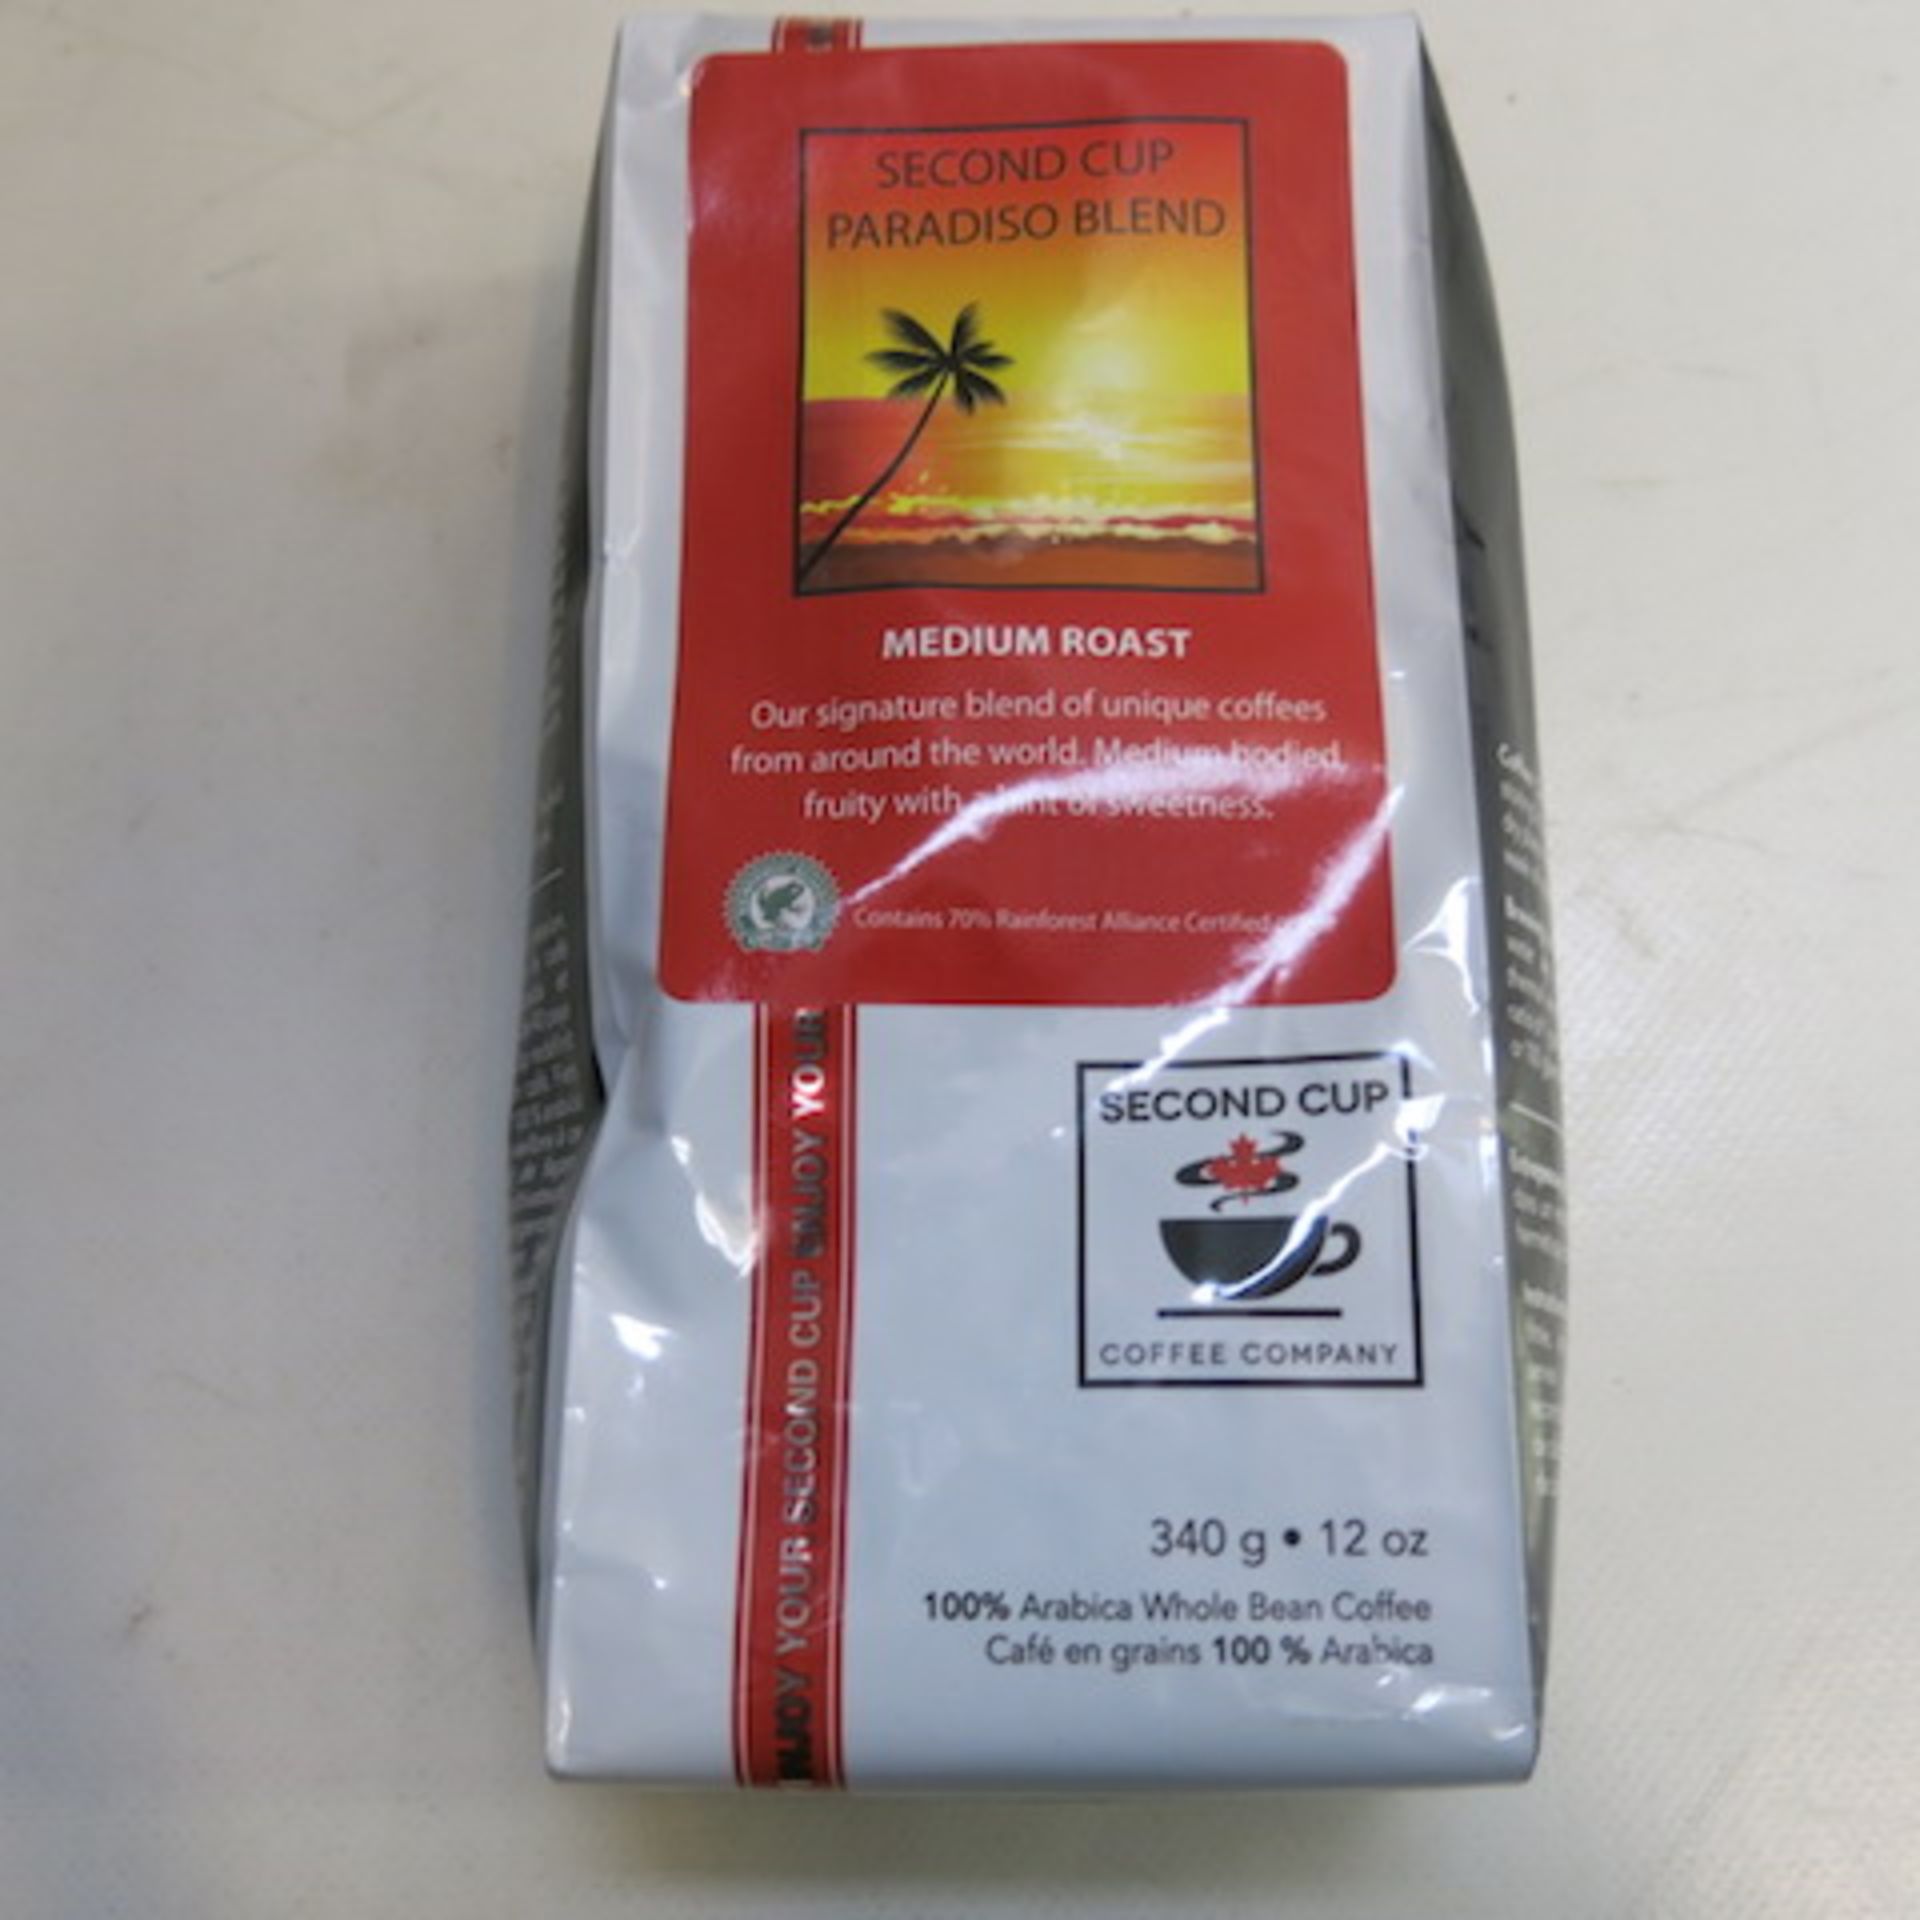 15 x 340g Bags of Rainforest Alliance Certified Whole Bean Coffee to Include 13 x Medium Roast & 2 x - Image 4 of 8